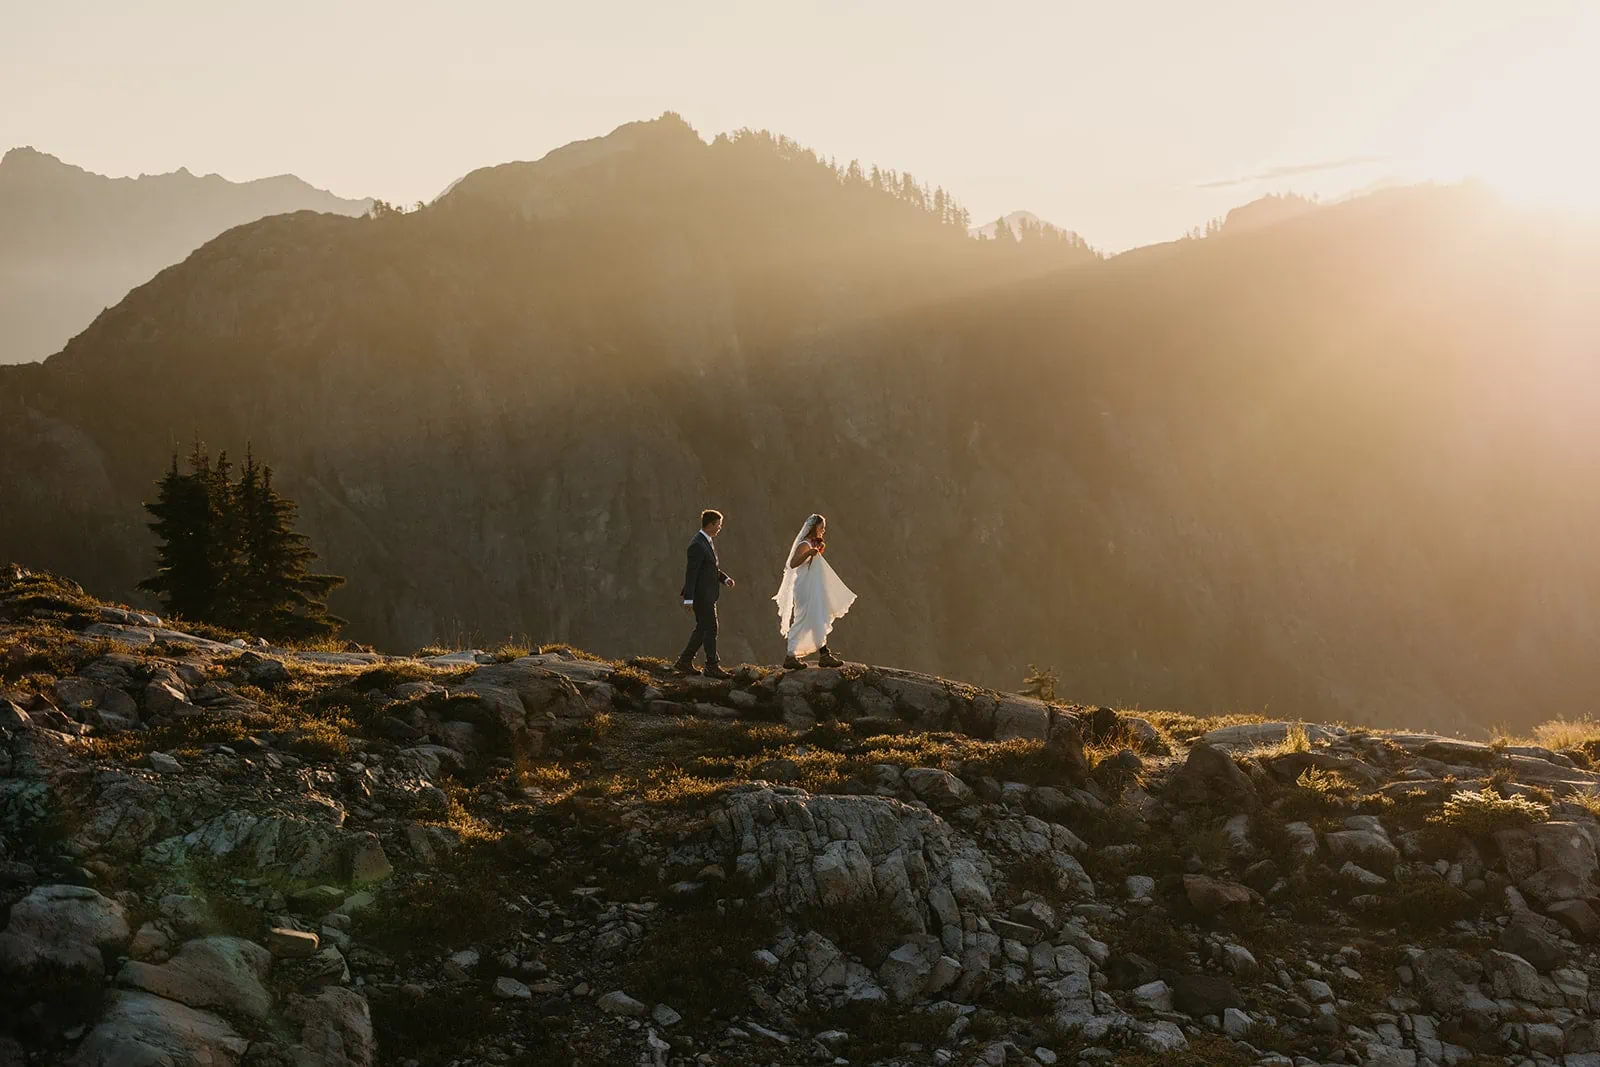 The bride and groom hike in the morning sunrise light.